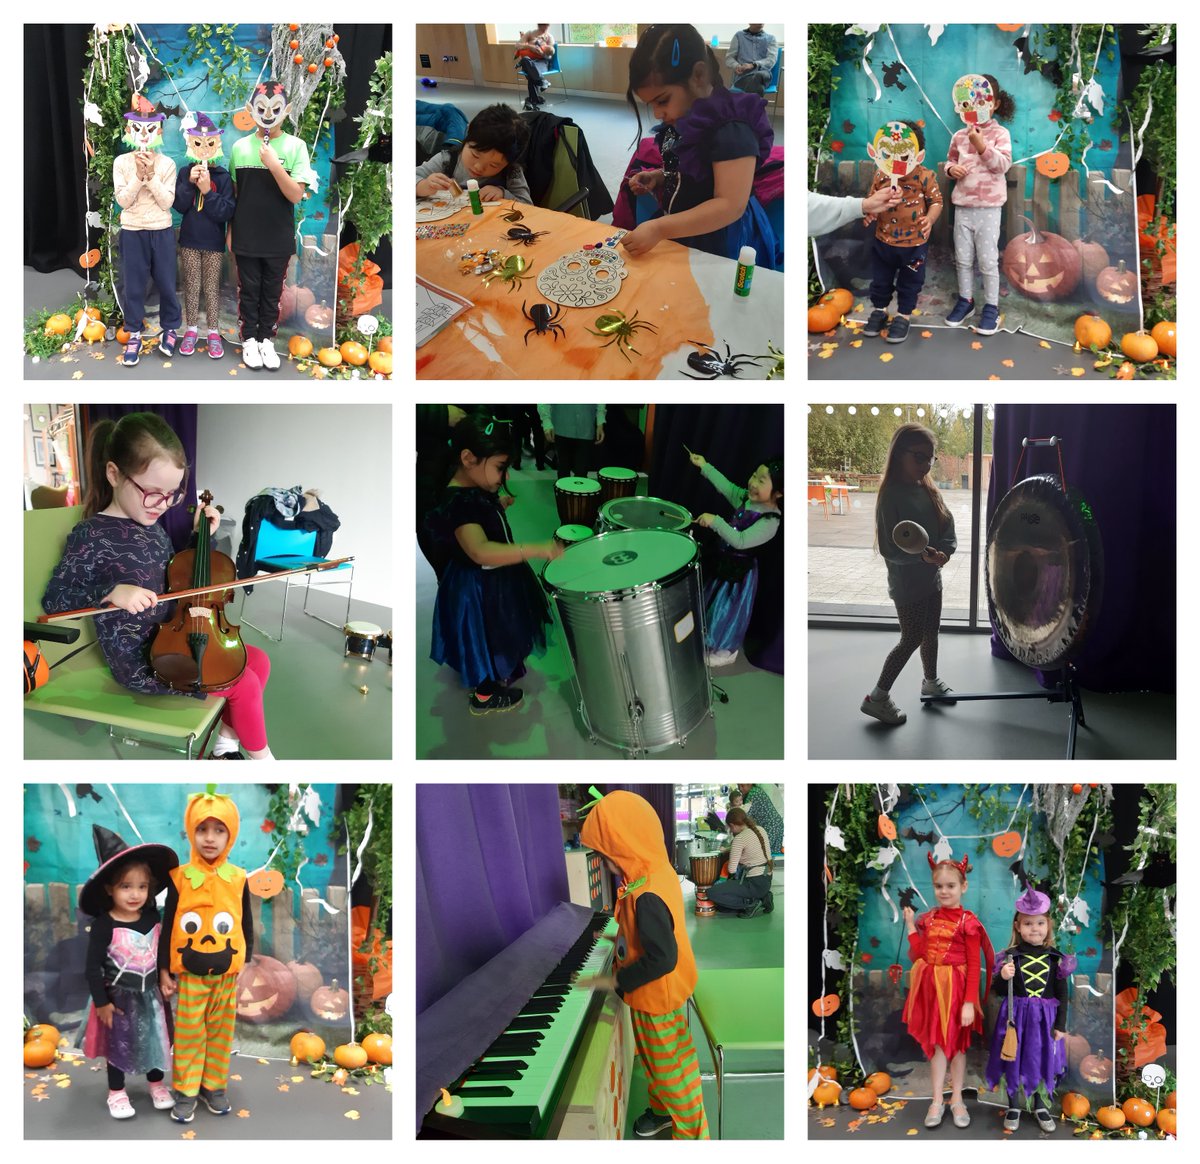 What a spooooky week we've had 👻 Thank you to everyone that's joined us for activities this week. We loved seeing you all in fancy dress, making spooky masks and sounds, pumpkin painting and enjoying messy play. Keep checking our social media for next month's events!